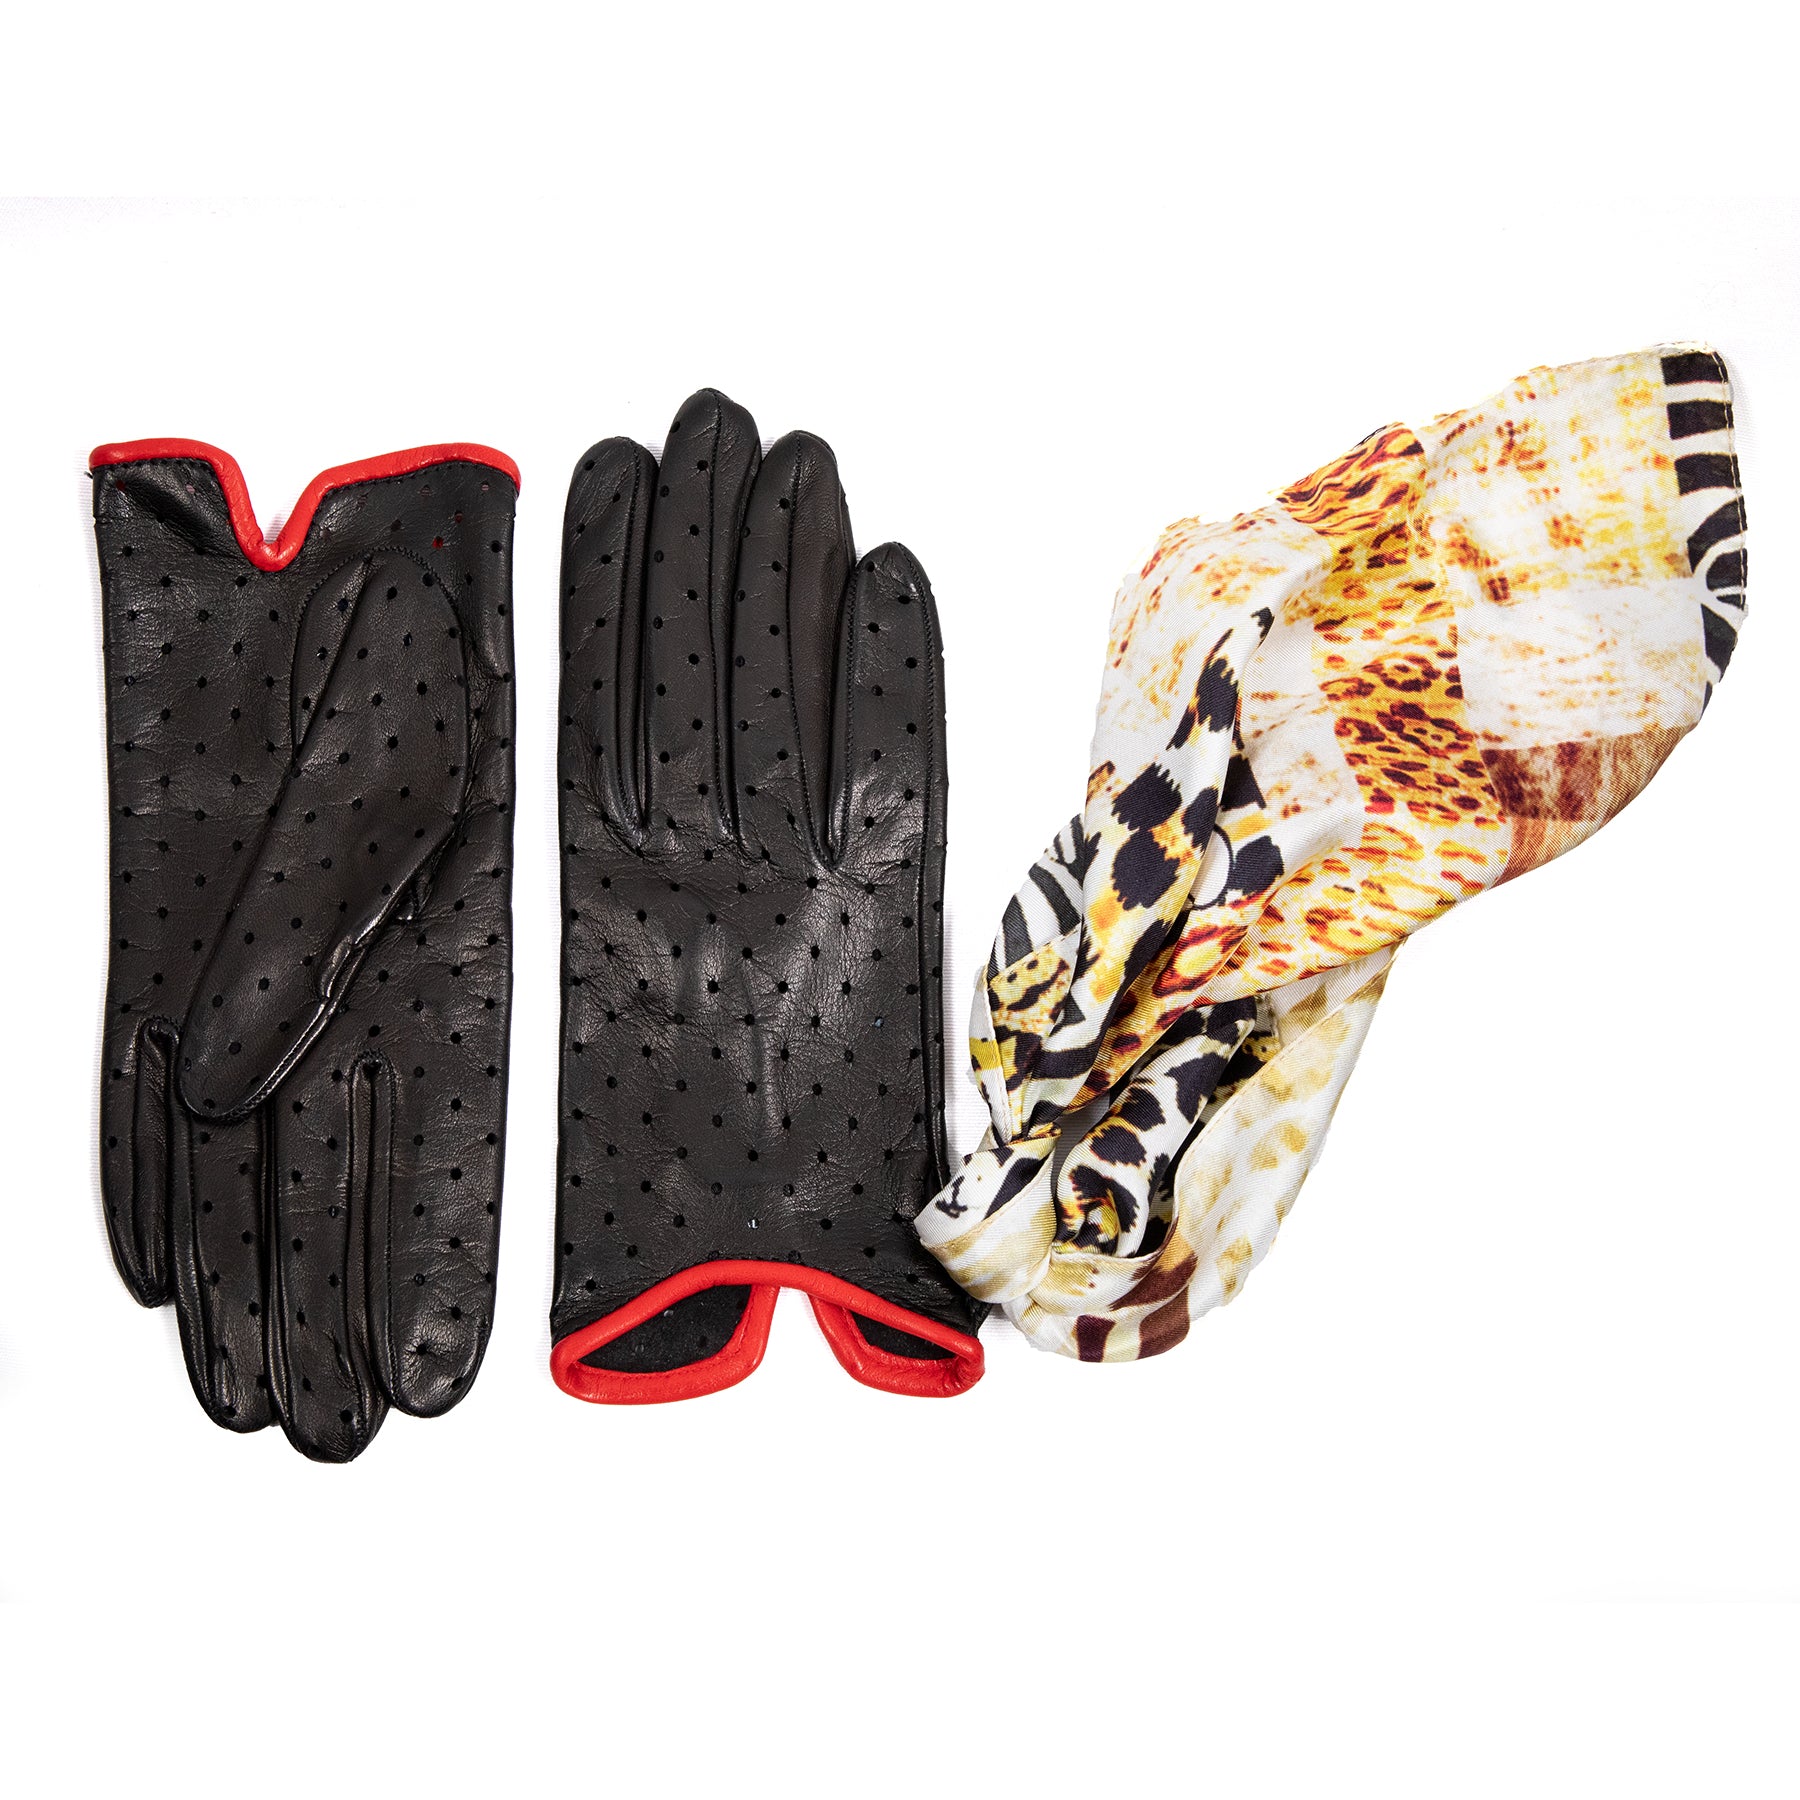 Women's Leather Gloves Made in Italy - Gala Gloves